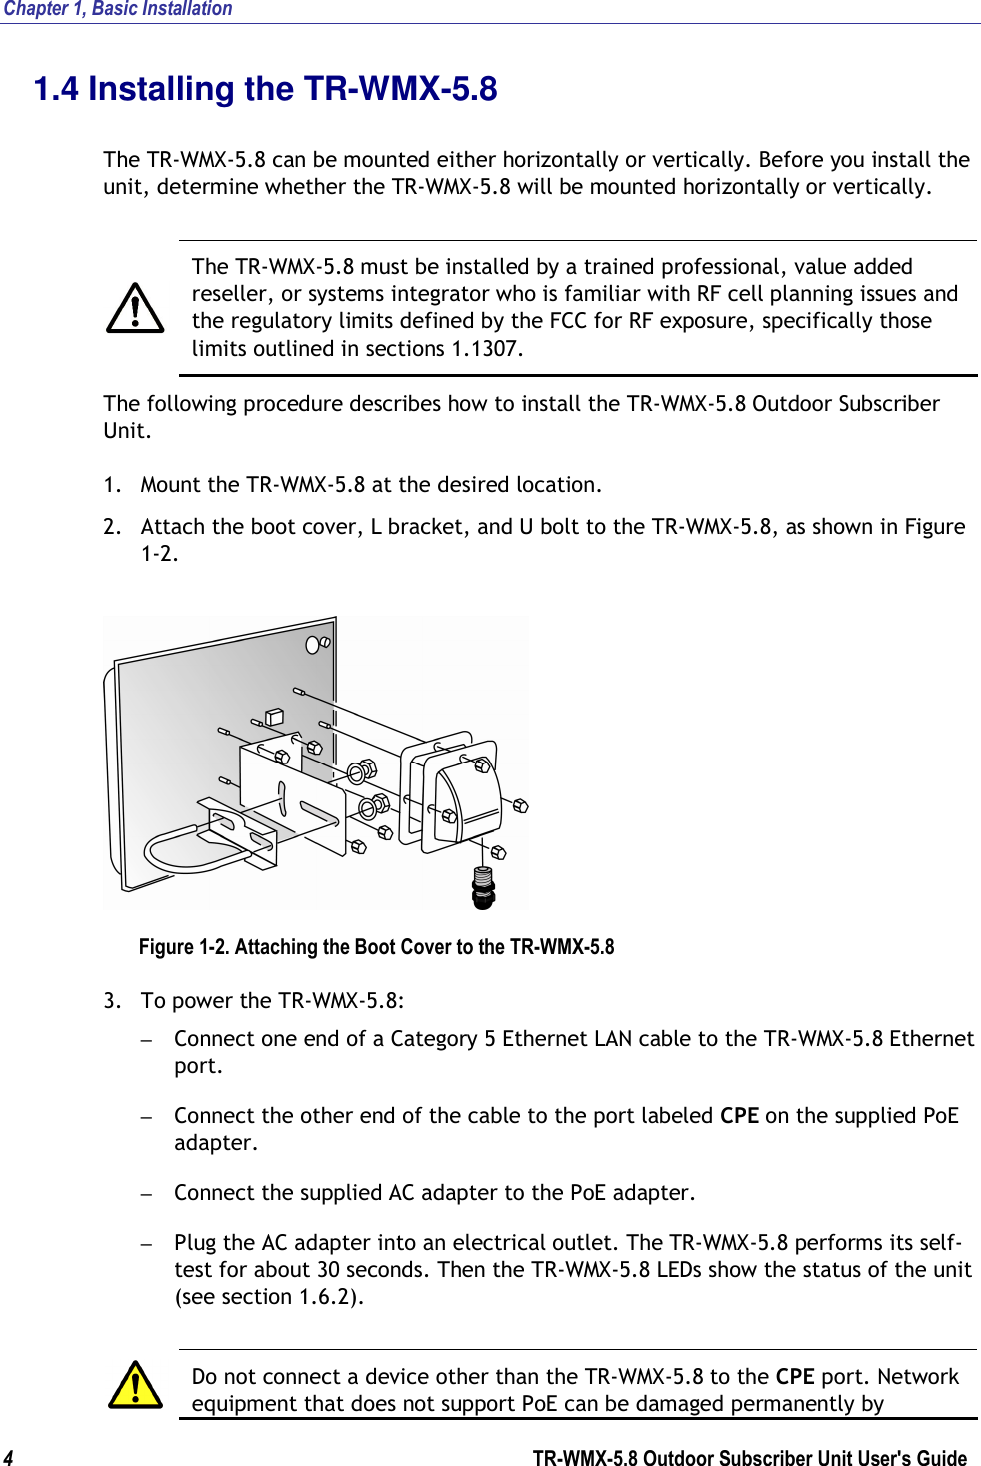 Chapter 1, Basic Installation  4        TR-WMX-5.8 Outdoor Subscriber Unit User&apos;s Guide  1.4 Installing the TR-WMX-5.8  The TR-WMX-5.8 can be mounted either horizontally or vertically. Before you install the unit, determine whether the TR-WMX-5.8 will be mounted horizontally or vertically.    The TR-WMX-5.8 must be installed by a trained professional, value added reseller, or systems integrator who is familiar with RF cell planning issues and the regulatory limits defined by the FCC for RF exposure, specifically those limits outlined in sections 1.1307. The following procedure describes how to install the TR-WMX-5.8 Outdoor Subscriber Unit. 1. Mount the TR-WMX-5.8 at the desired location. 2. Attach the boot cover, L bracket, and U bolt to the TR-WMX-5.8, as shown in Figure 1-2.  Figure 1-2. Attaching the Boot Cover to the TR-WMX-5.8 3. To power the TR-WMX-5.8: – Connect one end of a Category 5 Ethernet LAN cable to the TR-WMX-5.8 Ethernet port. – Connect the other end of the cable to the port labeled CPE on the supplied PoE adapter. – Connect the supplied AC adapter to the PoE adapter. – Plug the AC adapter into an electrical outlet. The TR-WMX-5.8 performs its self-test for about 30 seconds. Then the TR-WMX-5.8 LEDs show the status of the unit (see section 1.6.2).   Do not connect a device other than the TR-WMX-5.8 to the CPE port. Network equipment that does not support PoE can be damaged permanently by 